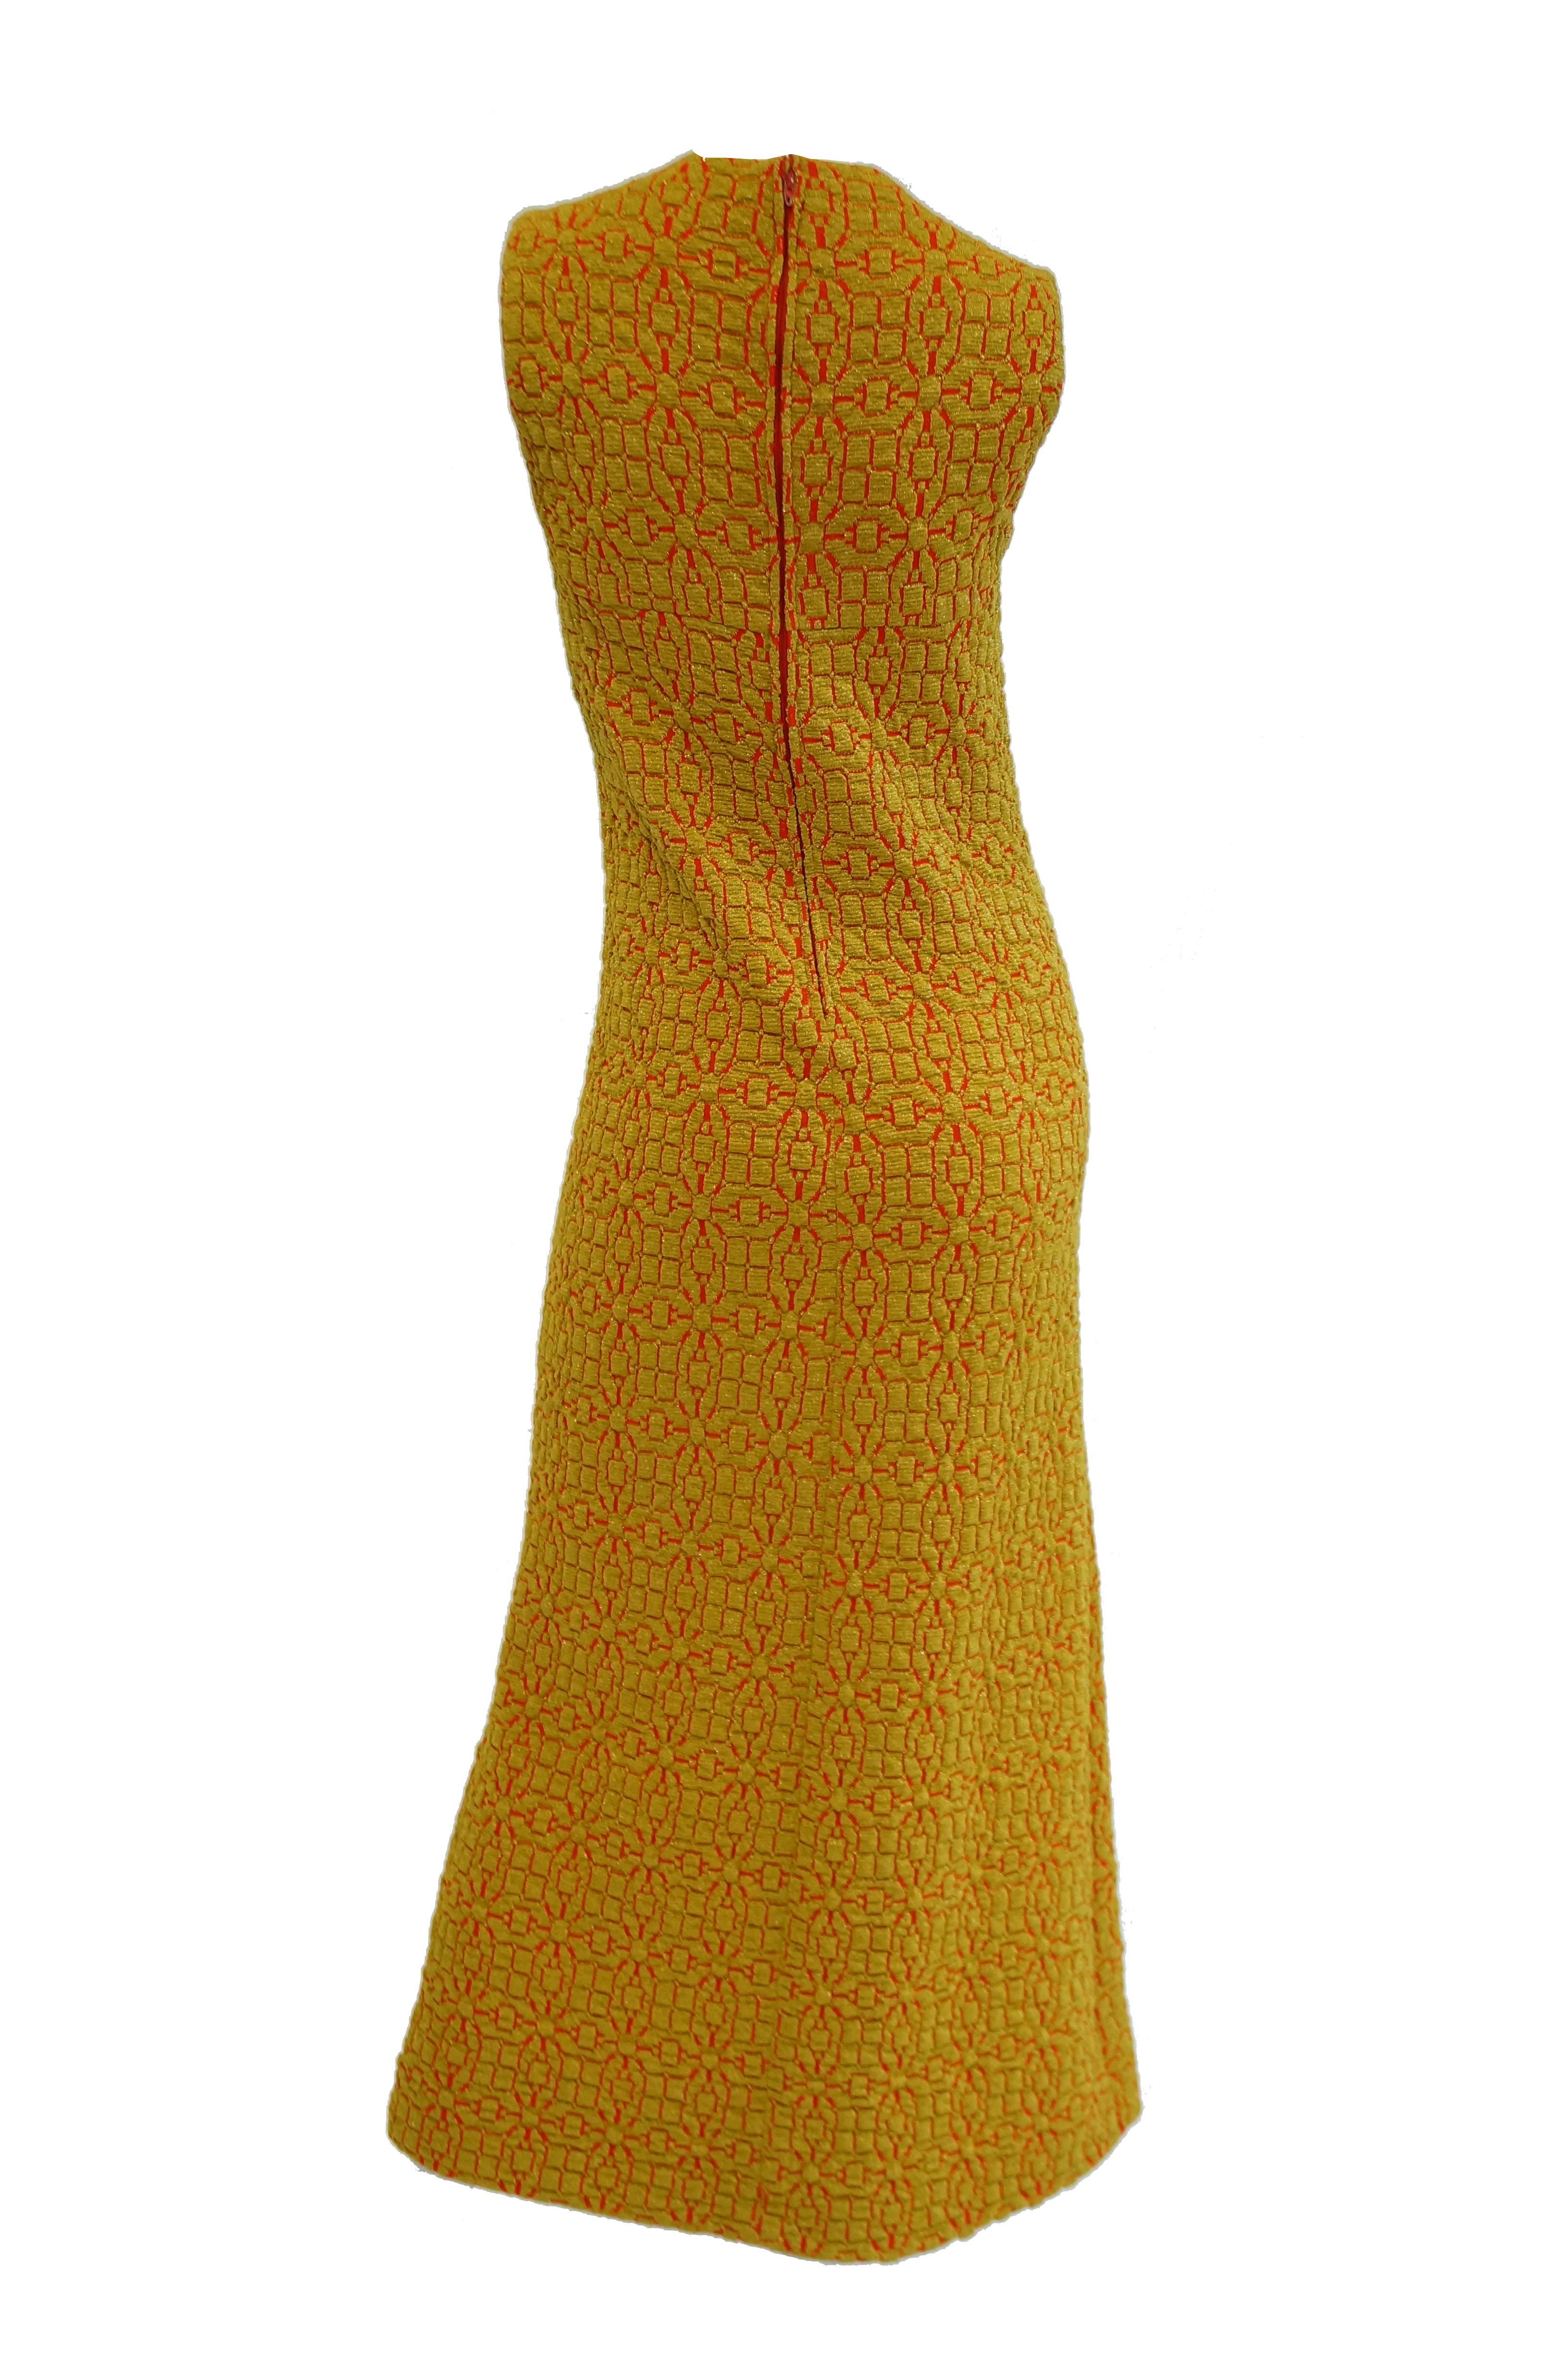 1960s Arnold Scaasi Gold and Red Knit Evening Dress and Jacket 2